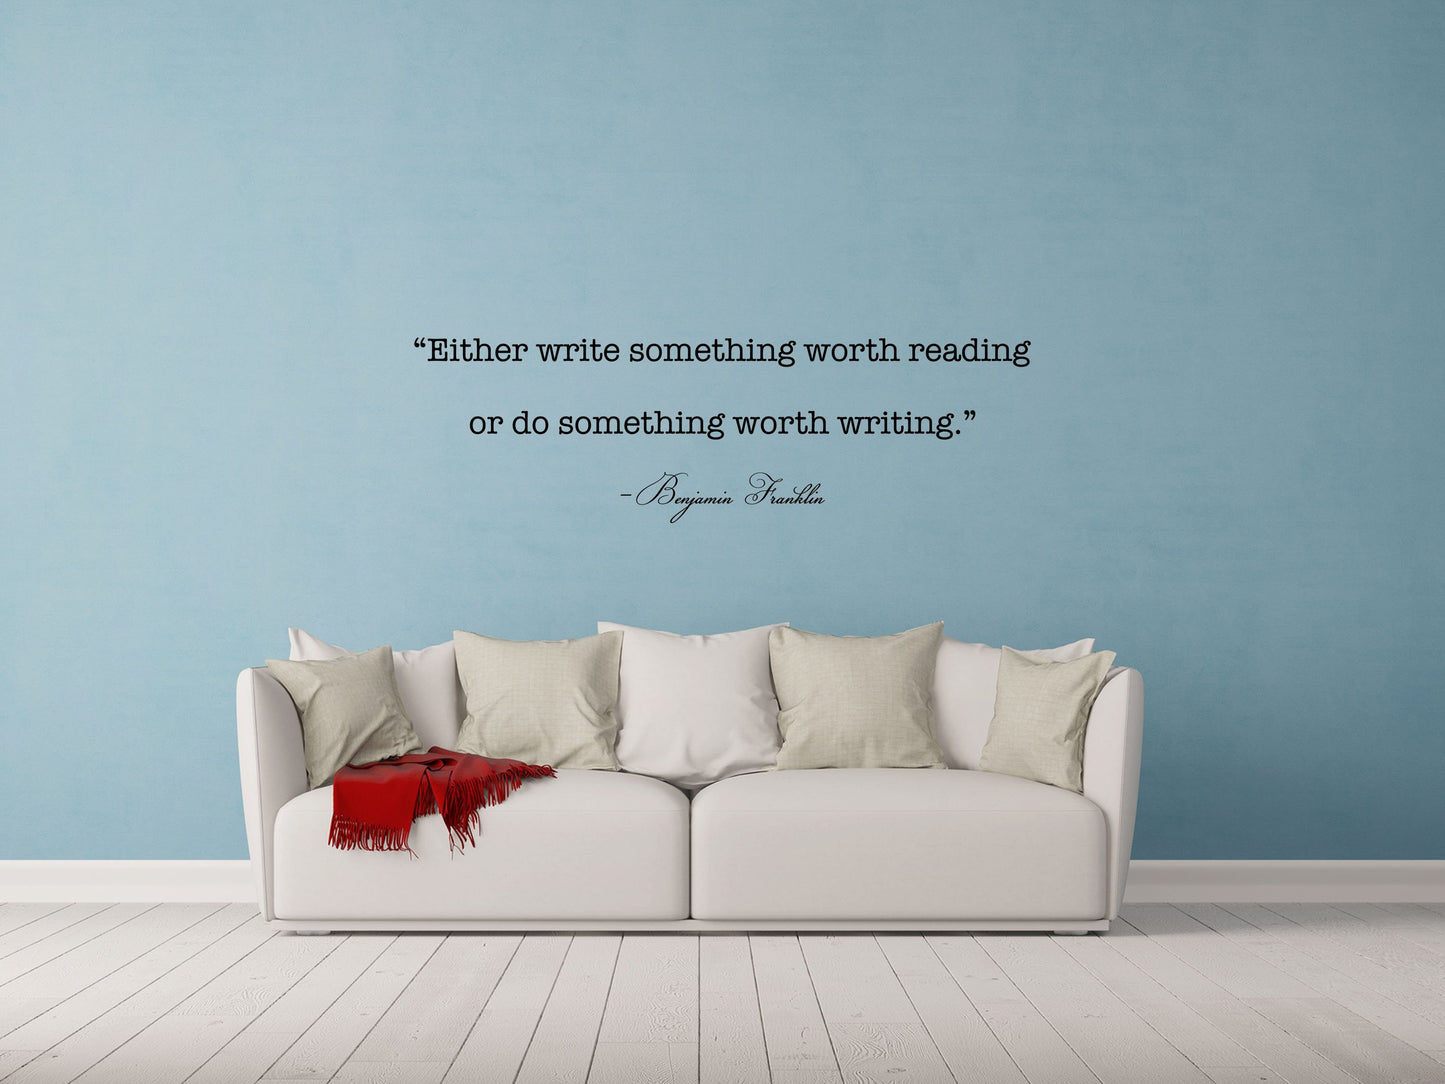 Either Write Something Worth Reading - Inspirational Wall Decals Vinyl Wall Decal Inspirational Wall Signs 